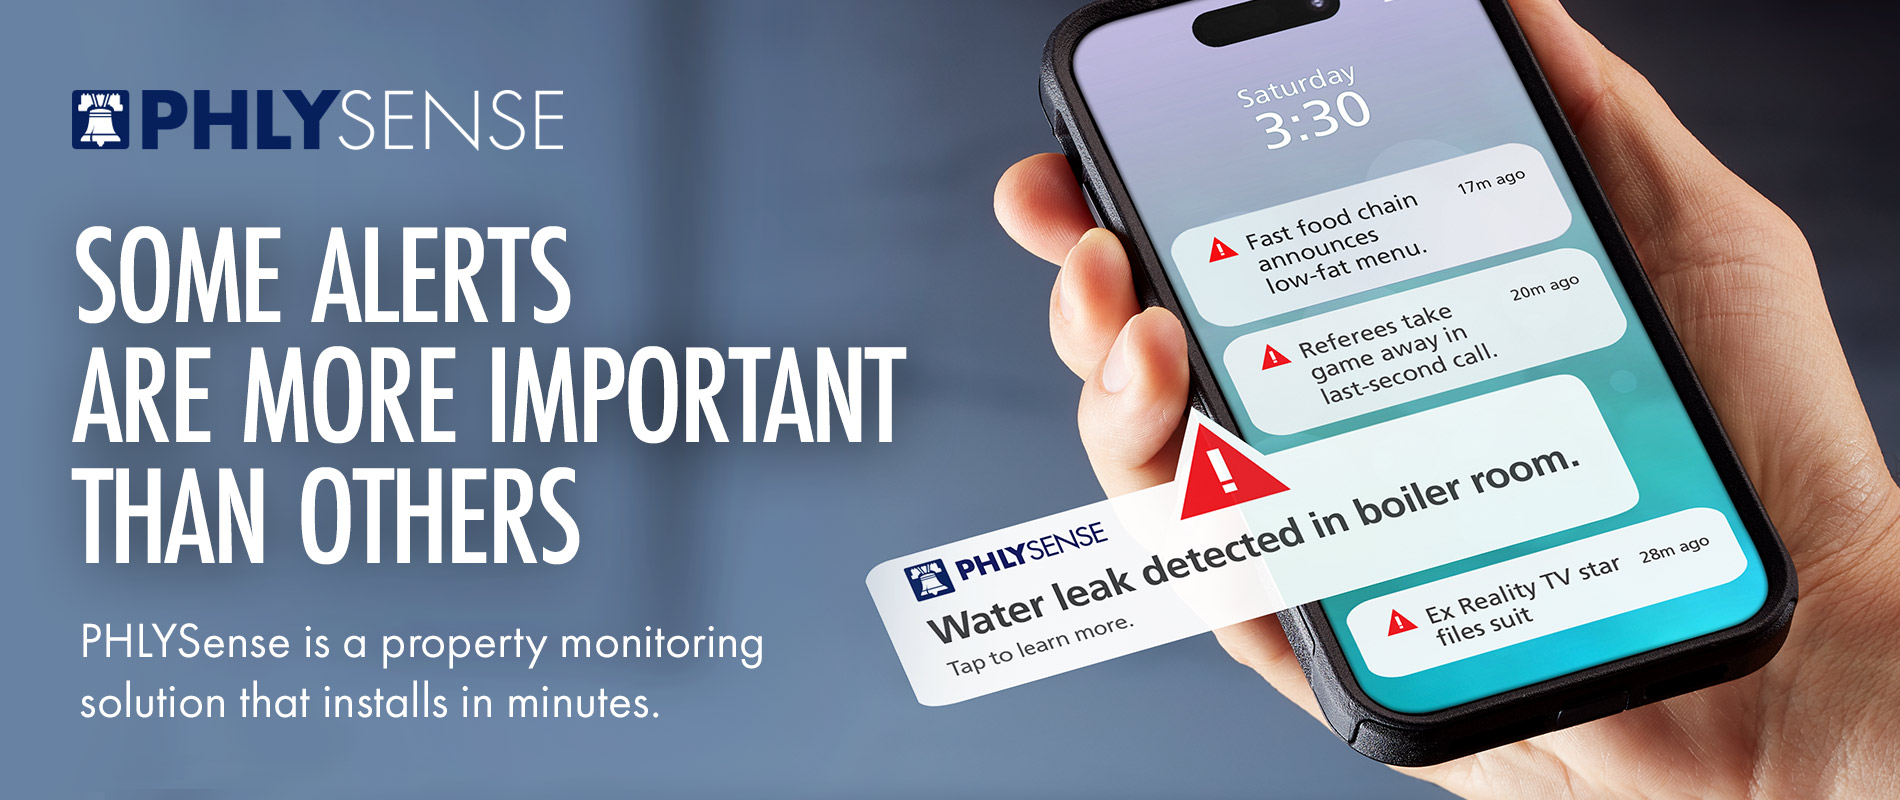 PHLY Sense - Some Alerts Are More Important Than Others - PHLY Sense is a property monitoring solution that installs in minutes. 